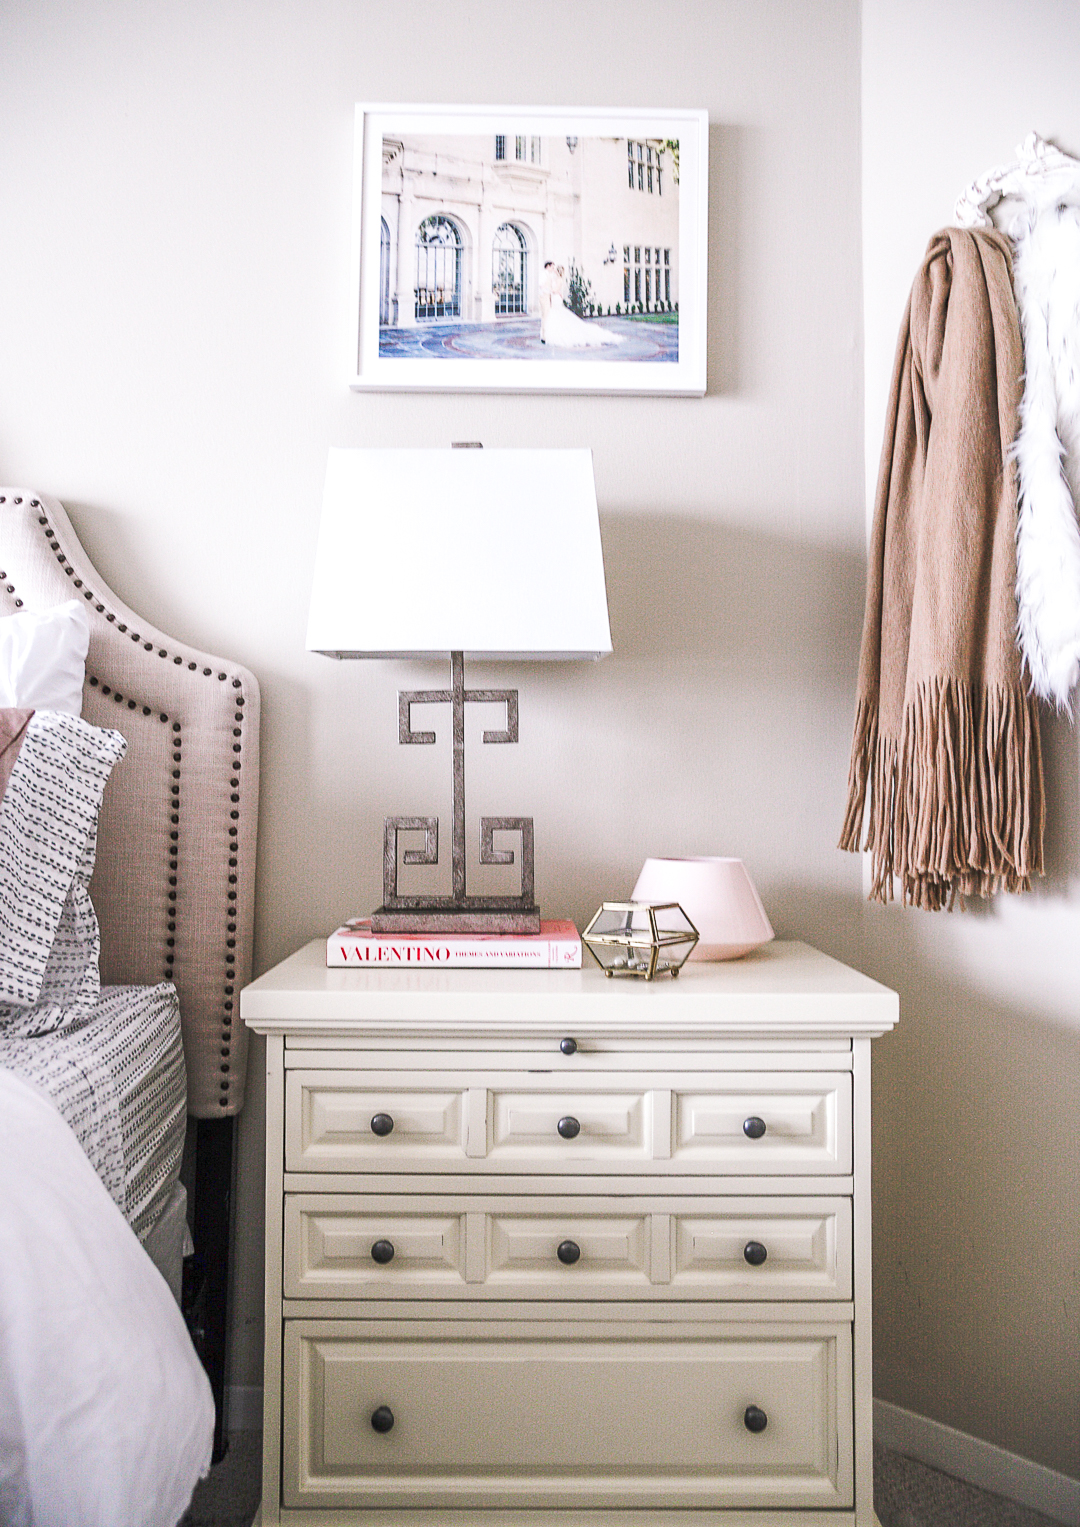 The perfectly decorated nightstand. - Second Bedroom Ideas with Havenly and Pier 1 by Chicago style blogger Visions of Vogue